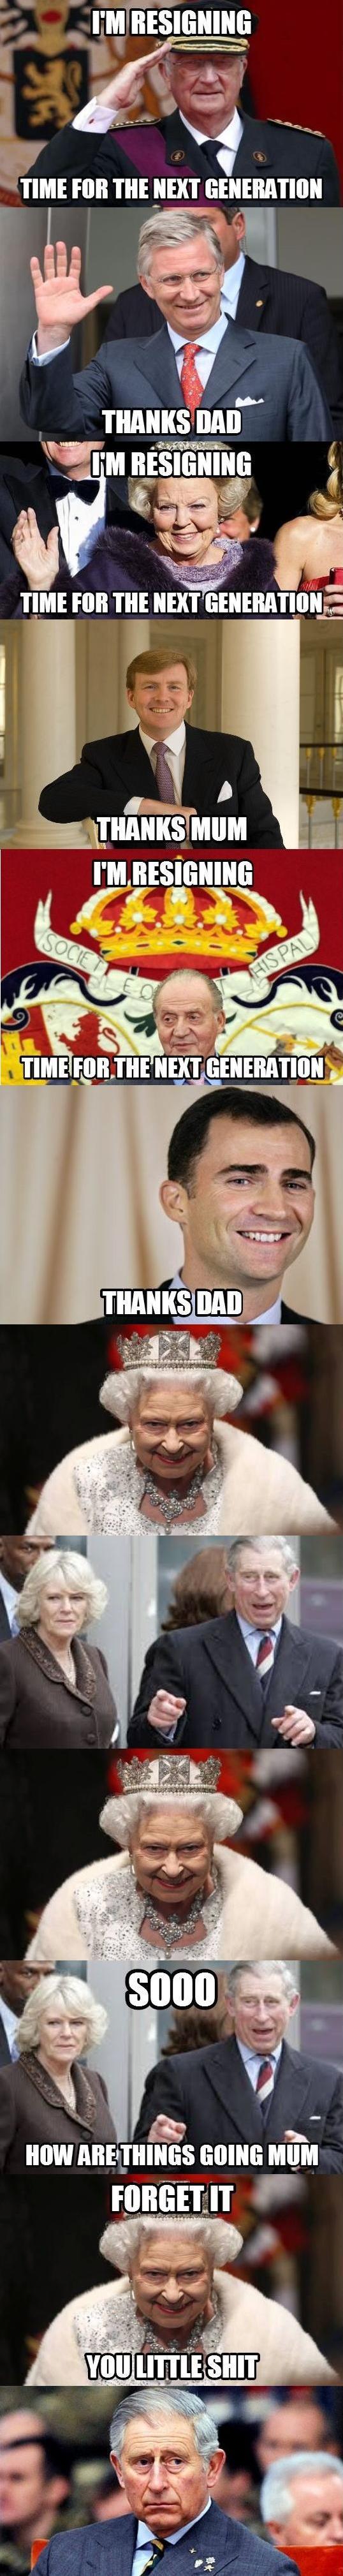 What are you, the queen of England? - meme